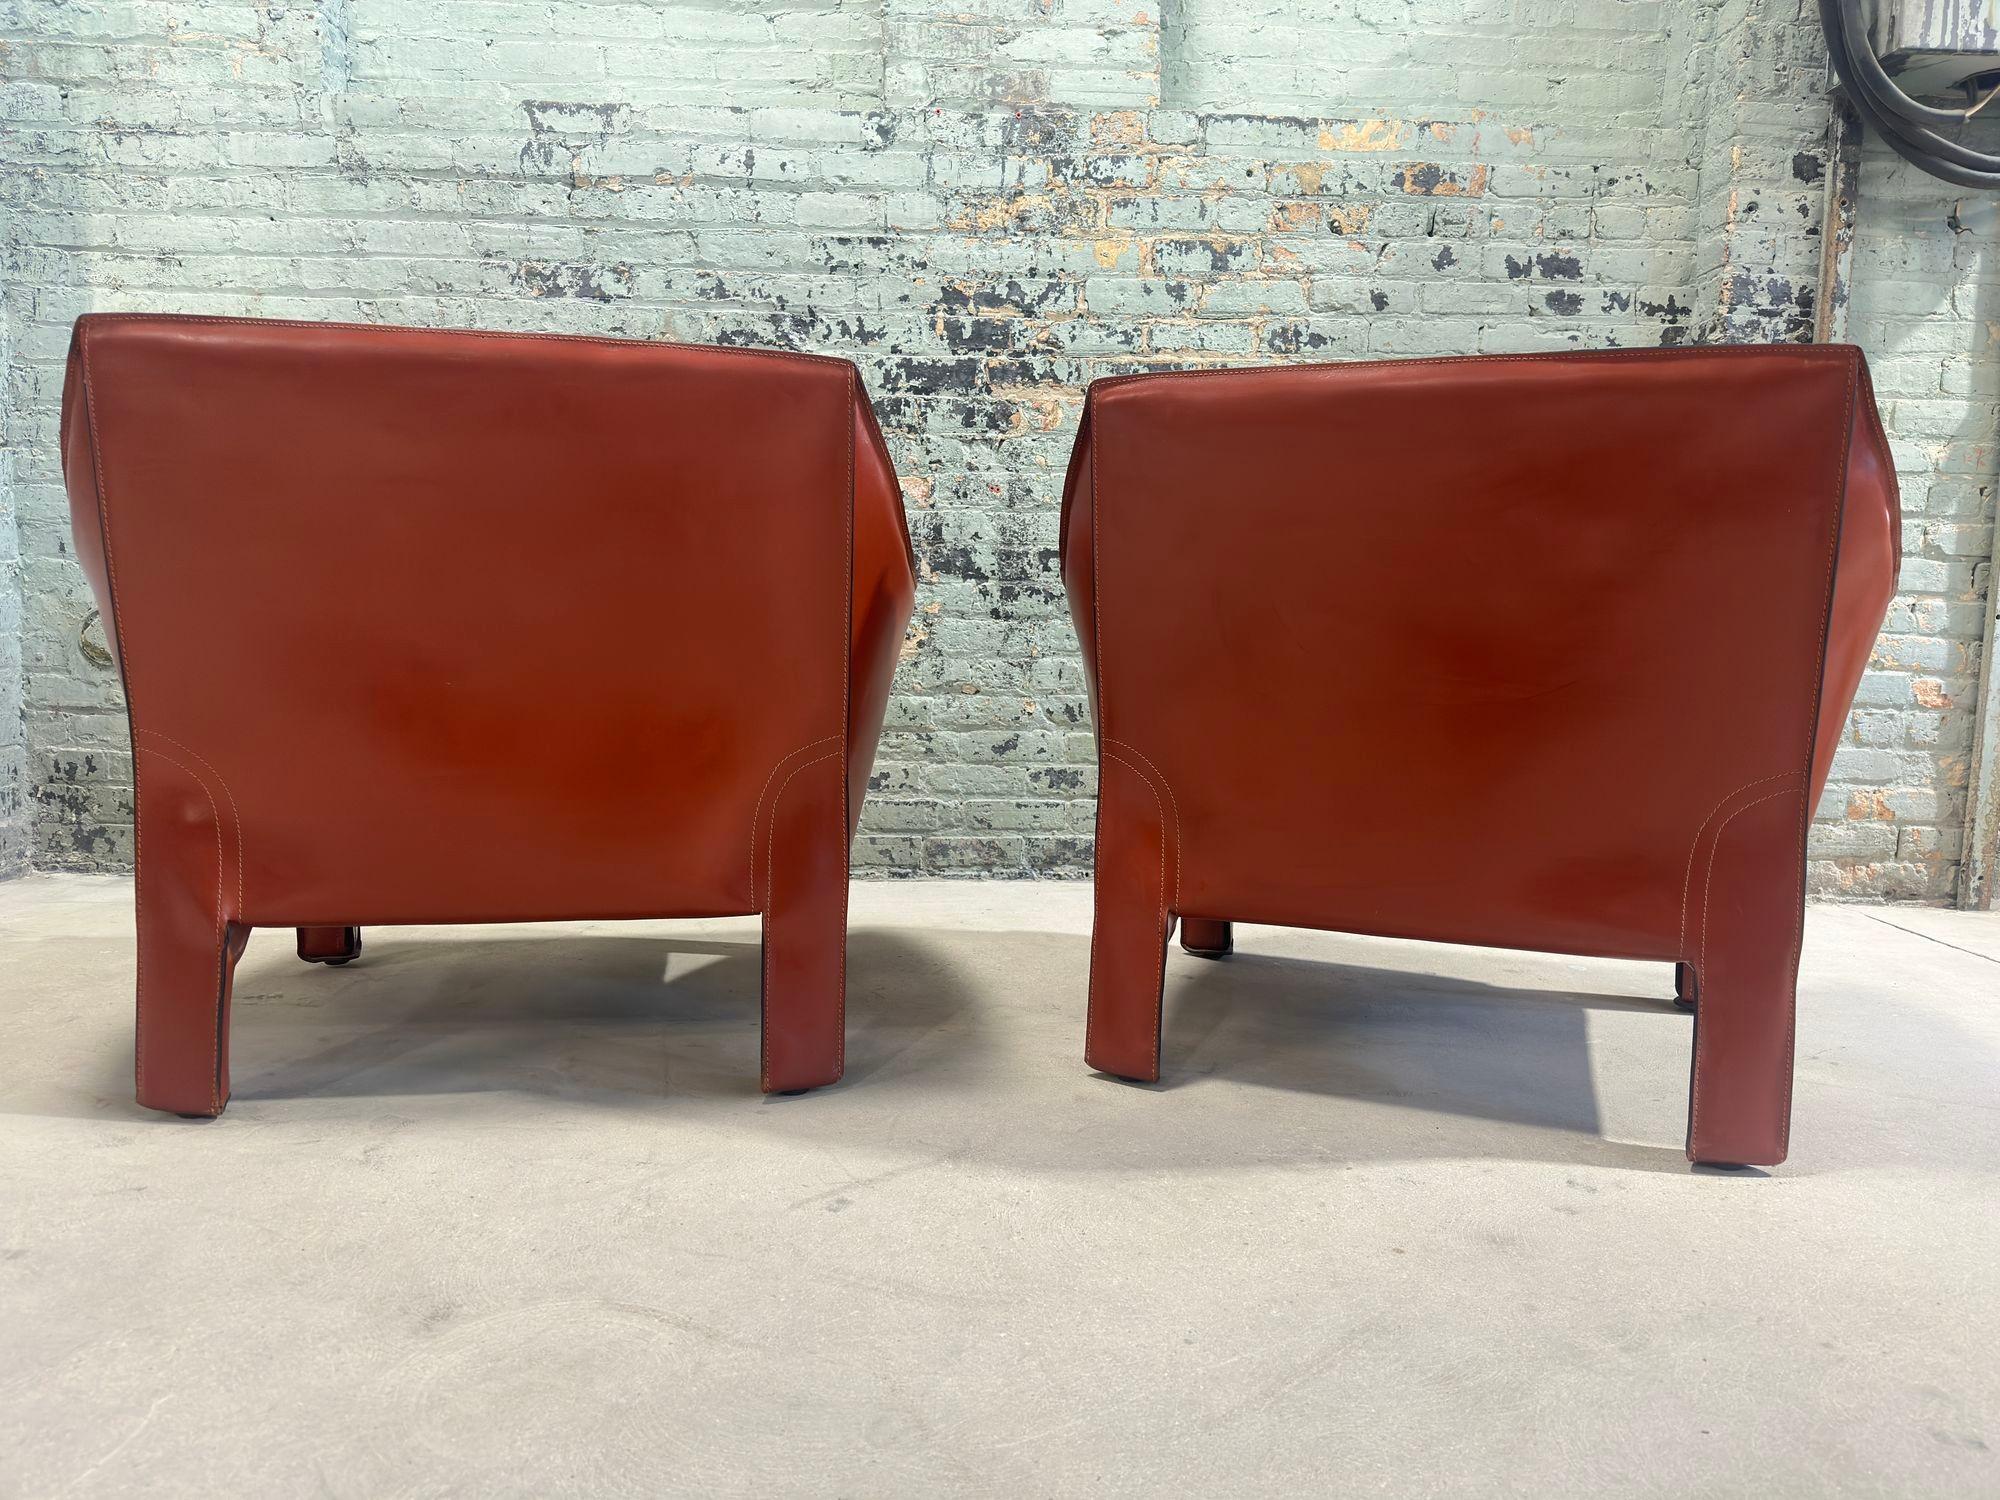 Mario Bellini Pair Leather Cab Lounge Chairs, Model 415, Italy 1970 For Sale 3